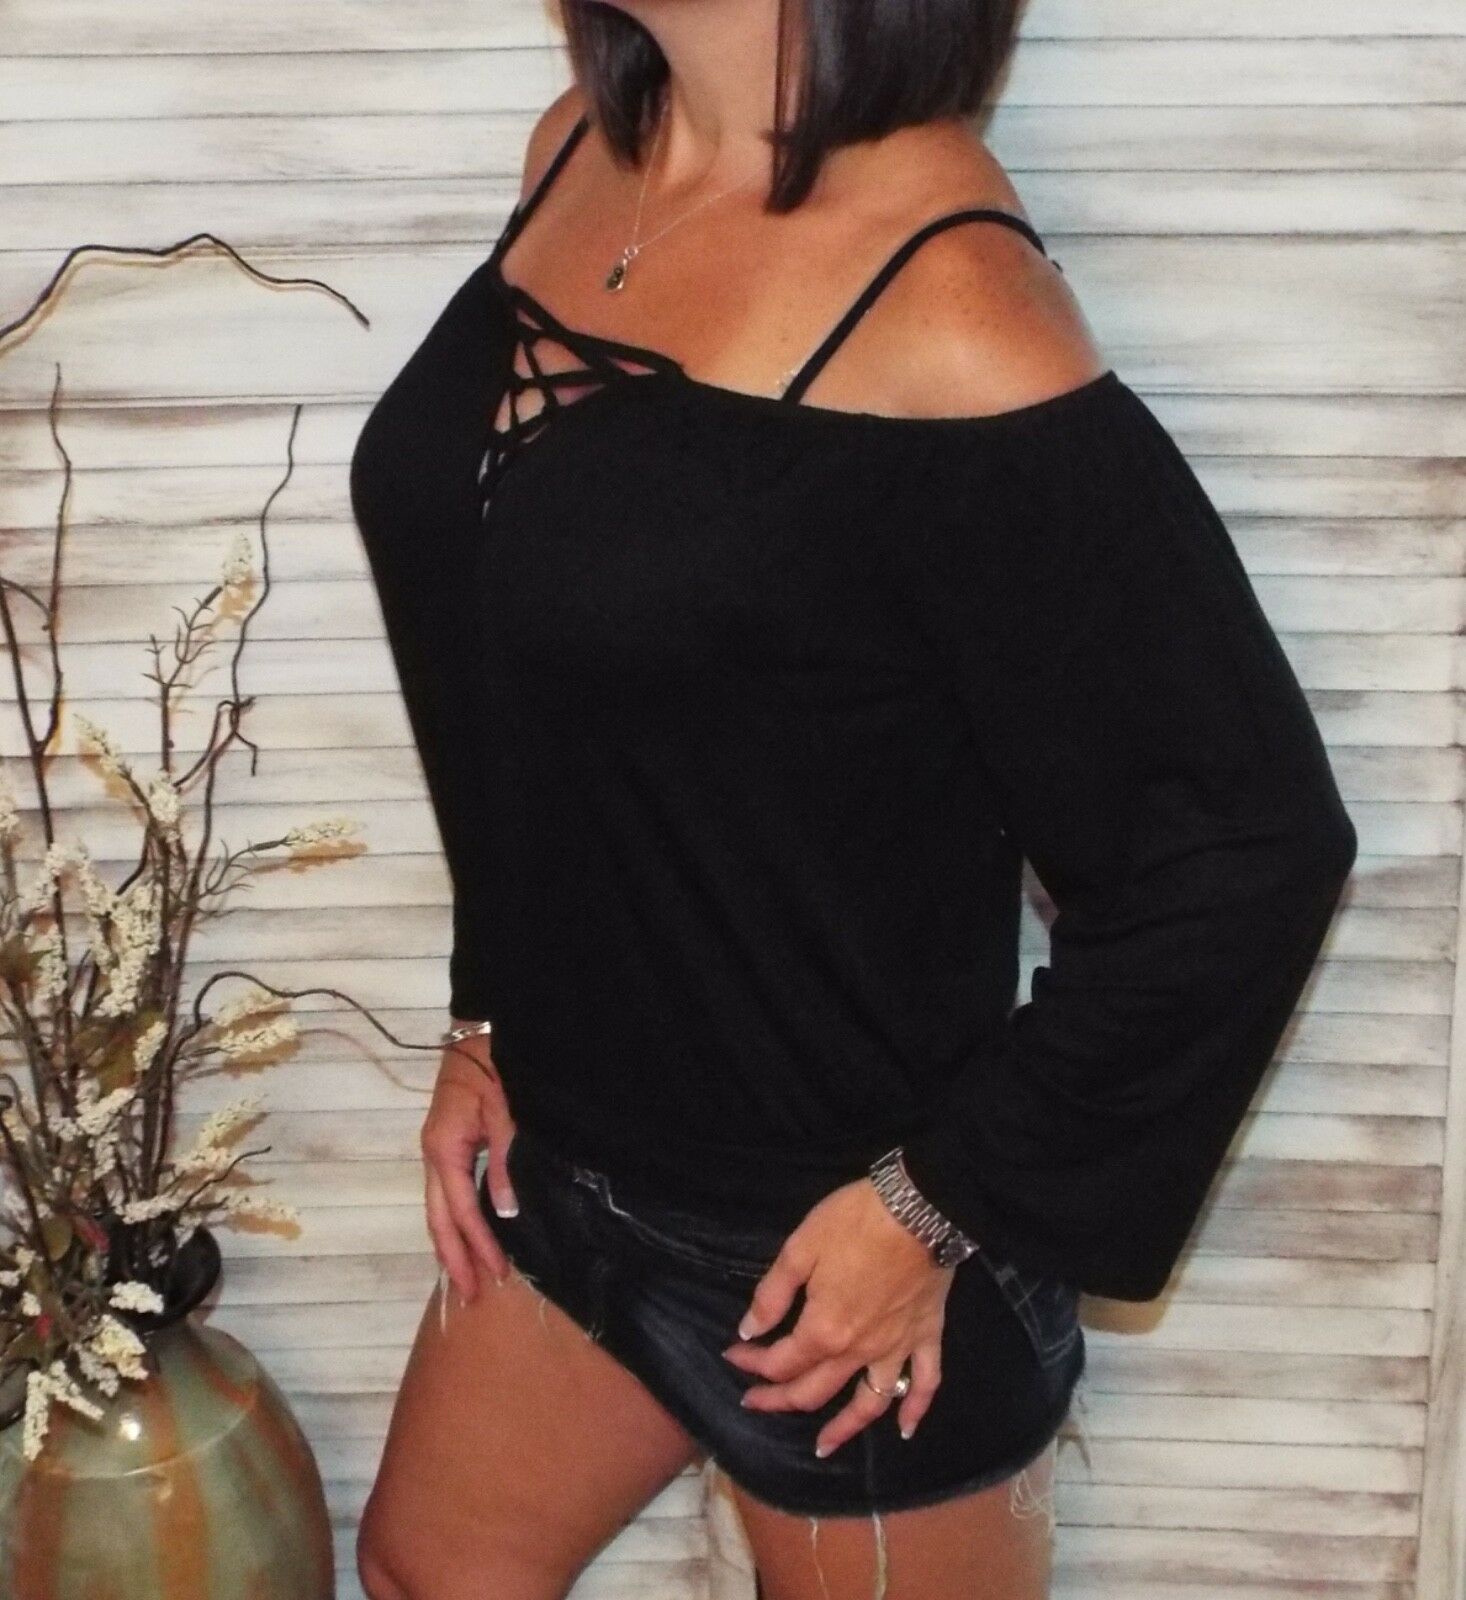 Very Sexy V-Neck Cold Shoulder Cutout Lace Up Floaty Top Black S/M/L